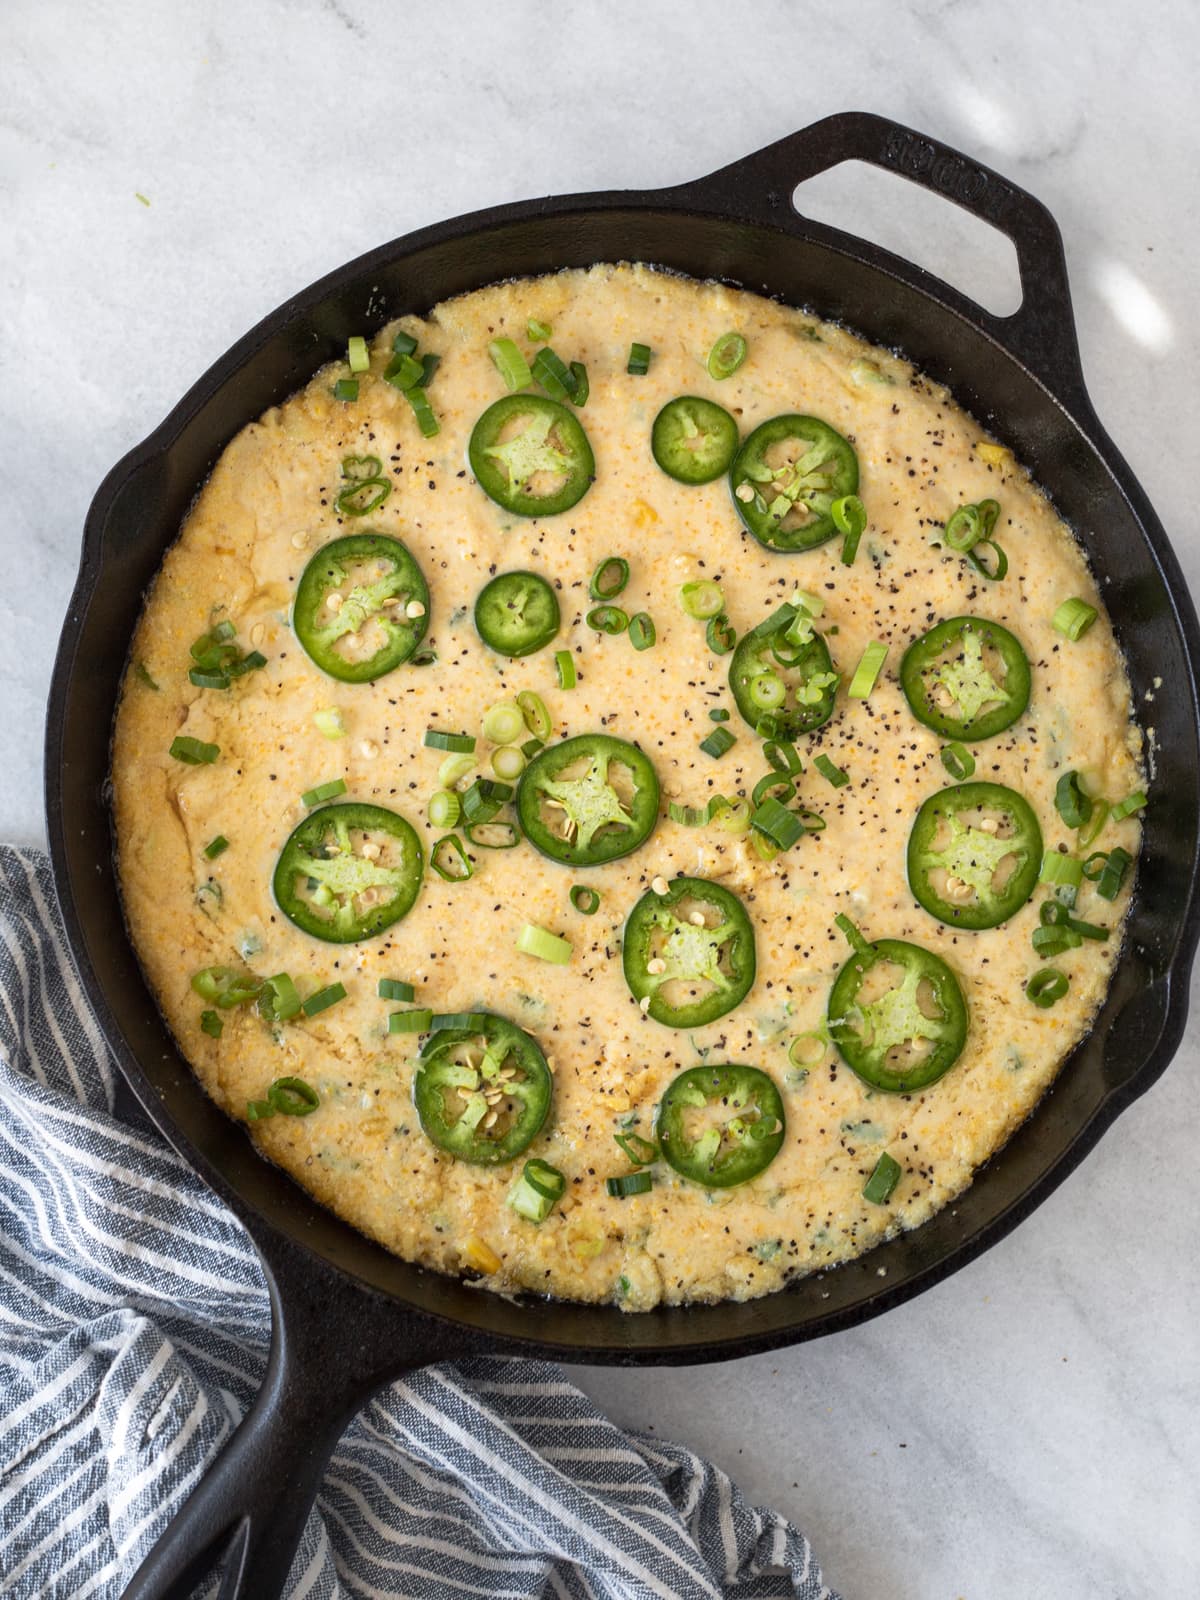 Cornbread batter topped with slices of jalapenos and green onions in a cast iron skillet.